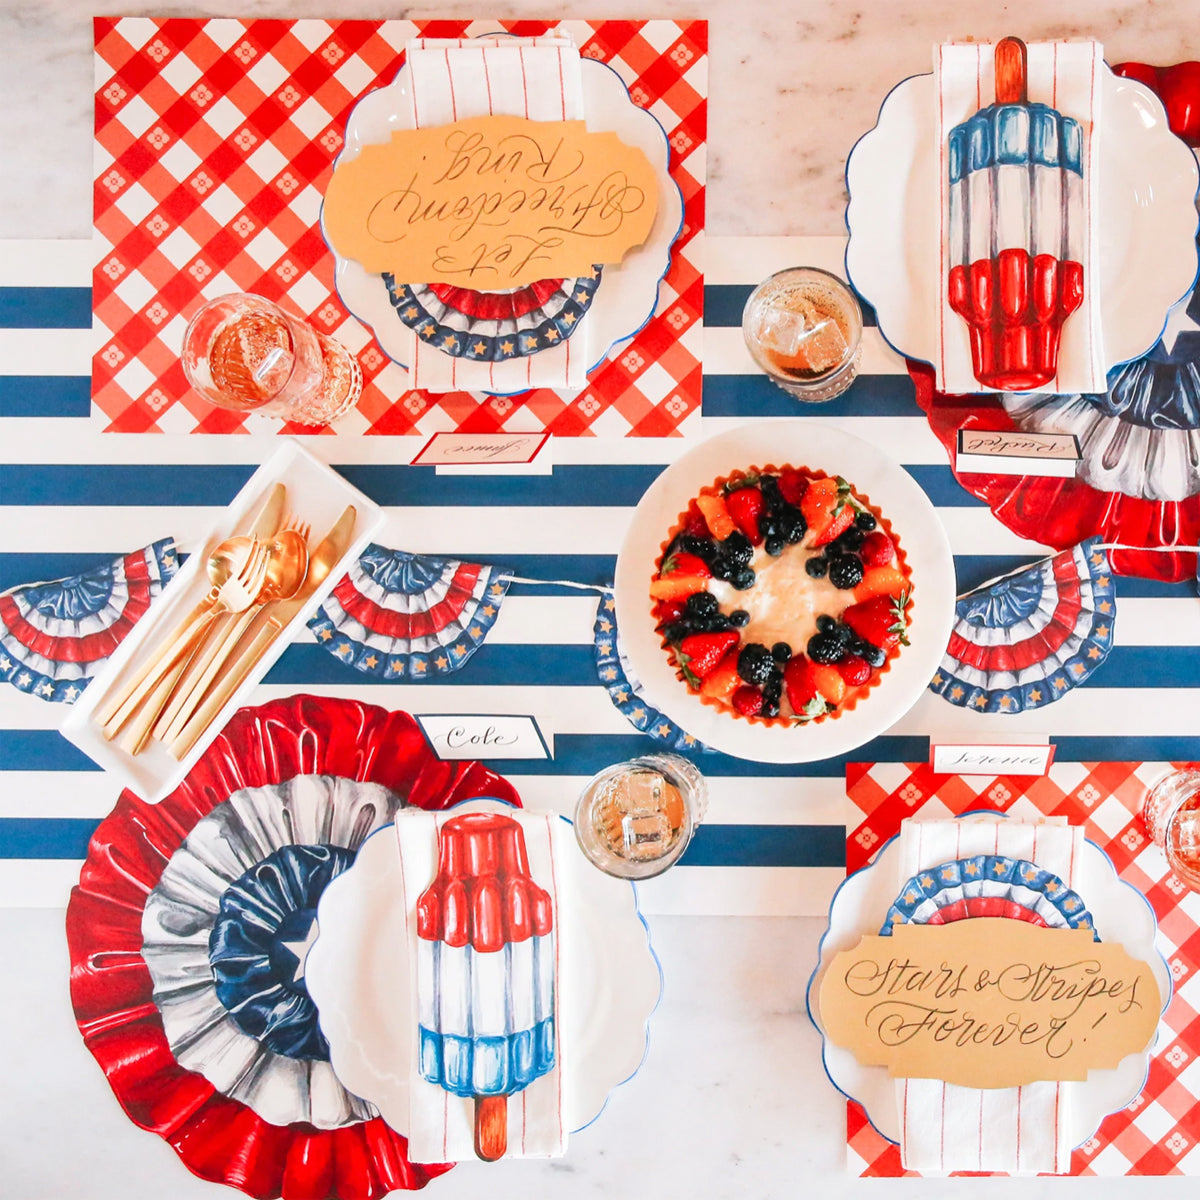 Die Cut Star Spangled Placemat